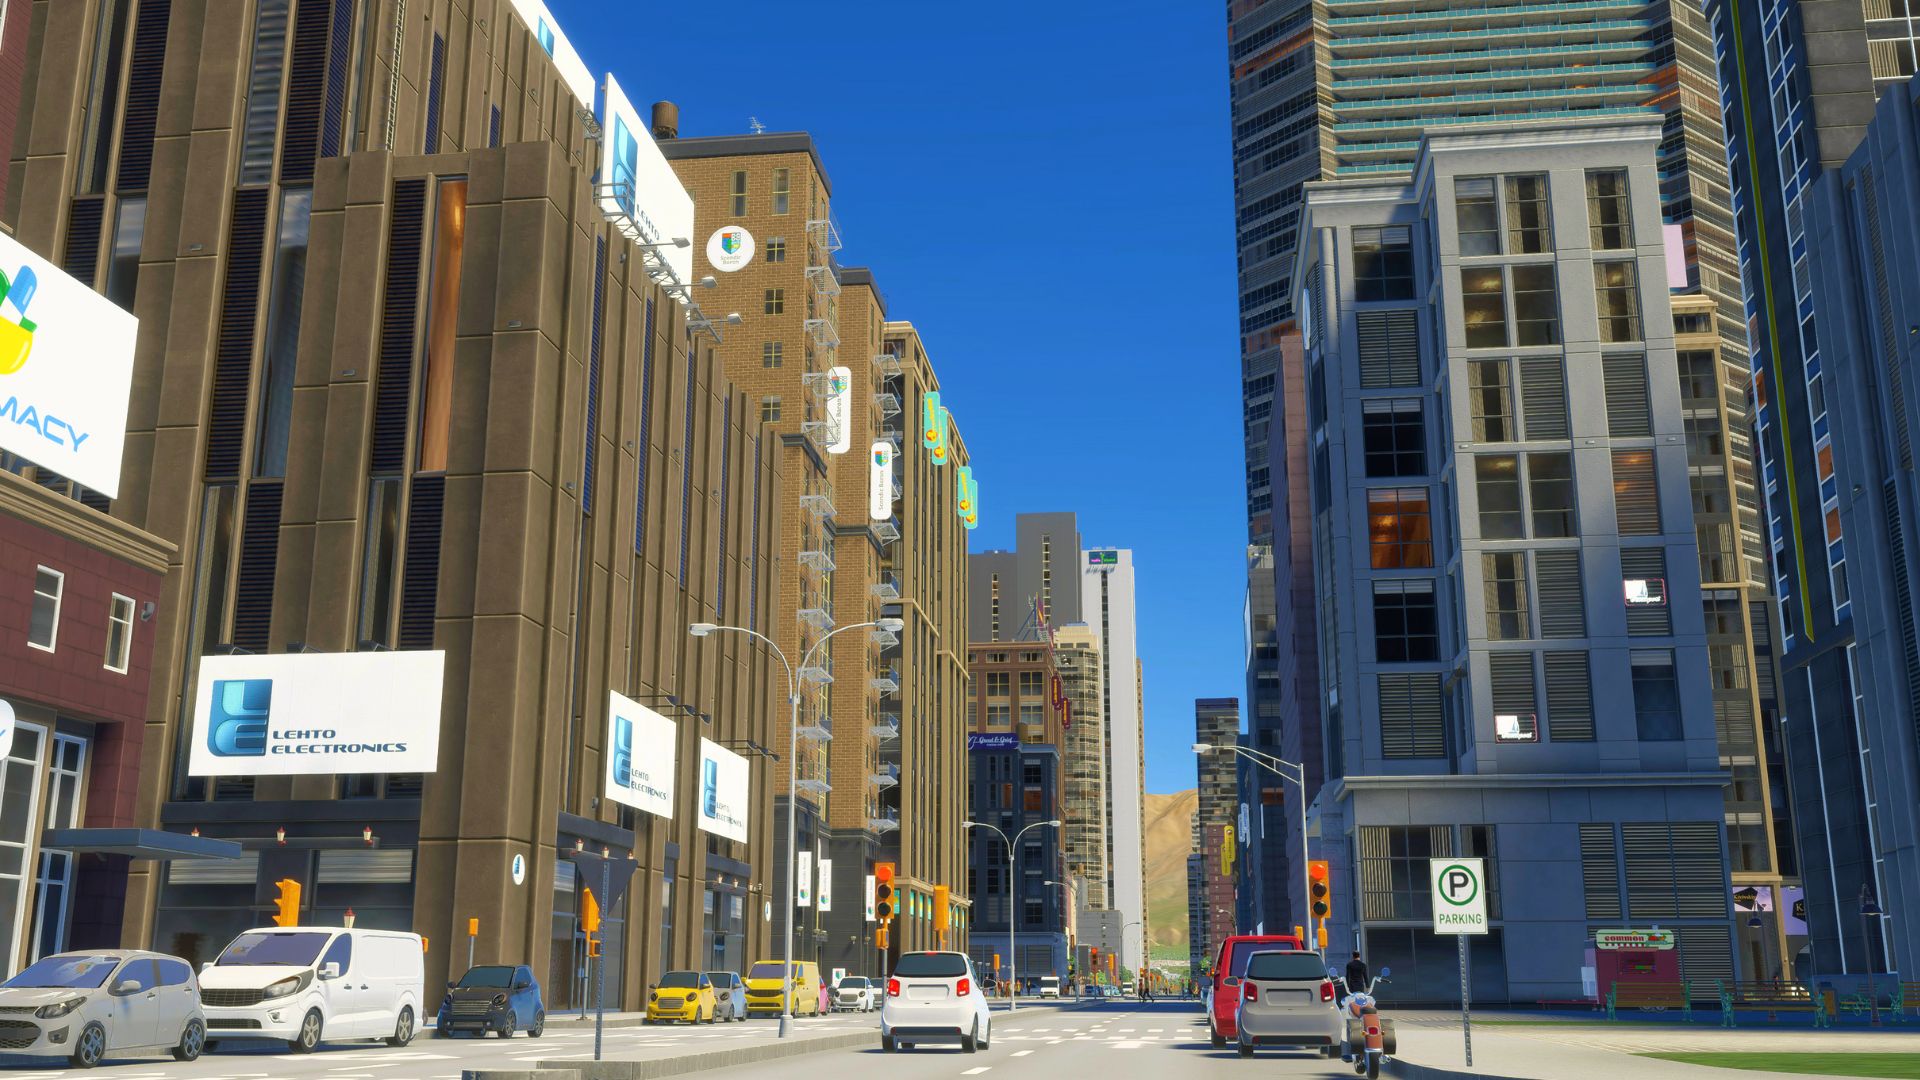 Cities Skylines 2 parking lots will really get your traffic flowing